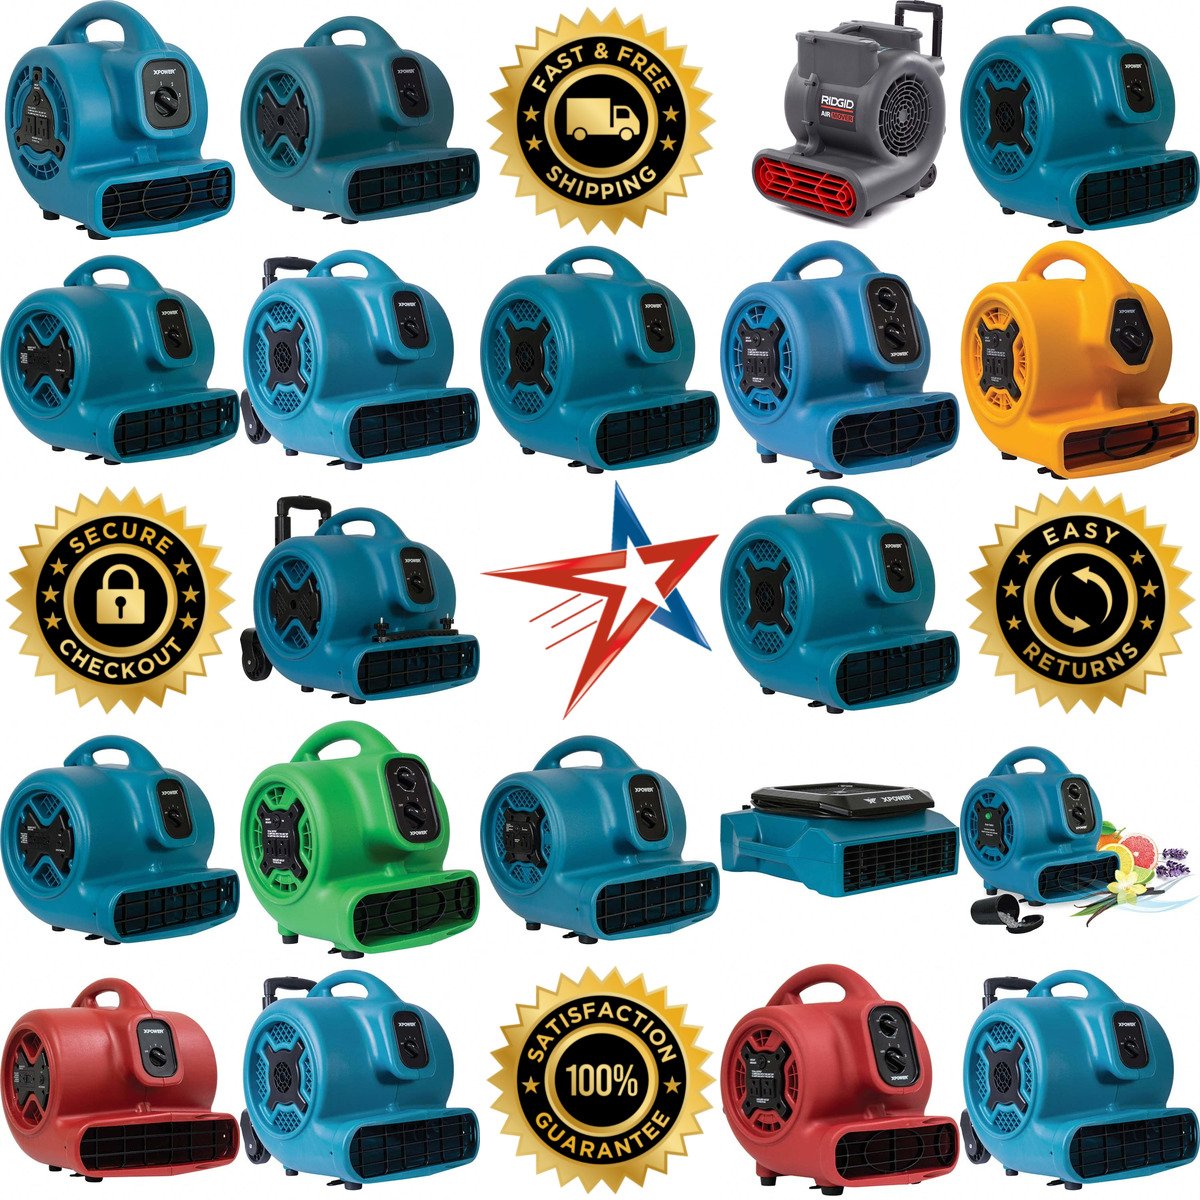 A selection of Carpet and Floor Dryers products on GoVets